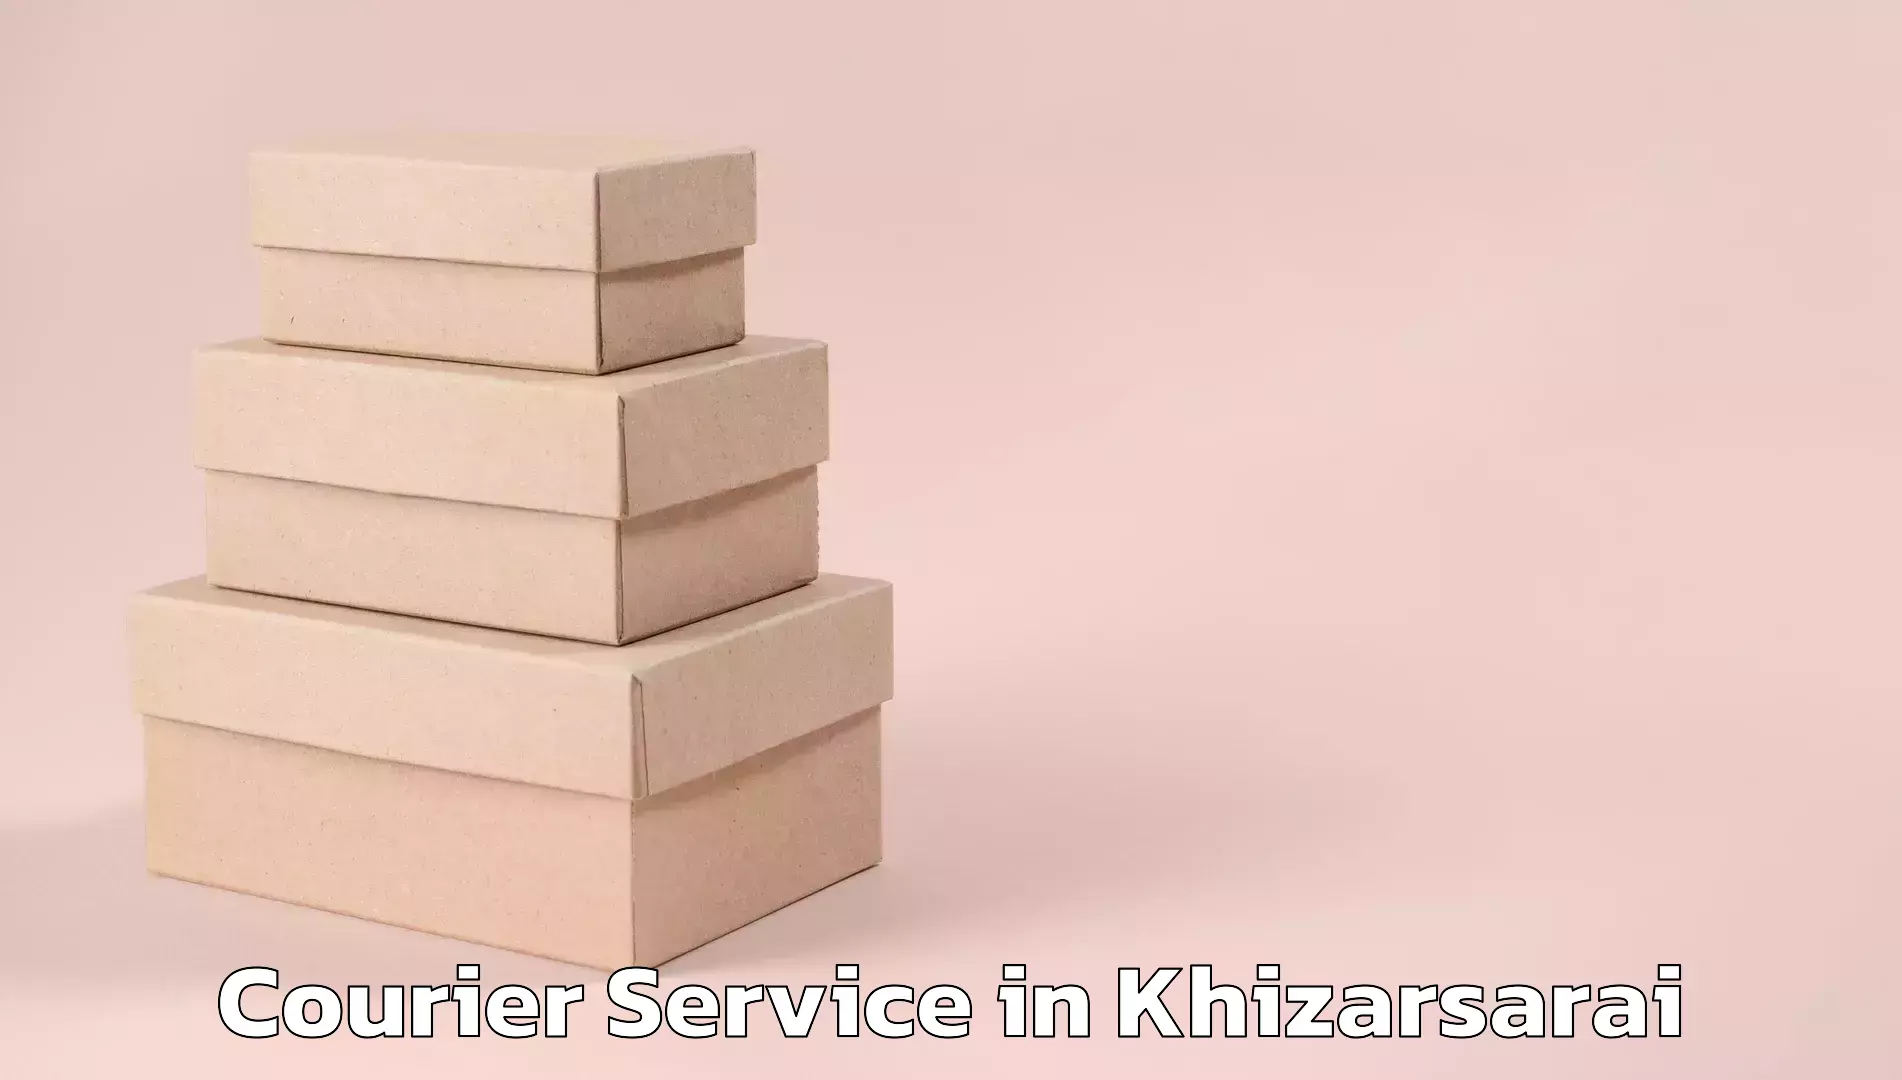 Postal and courier services in Khizarsarai